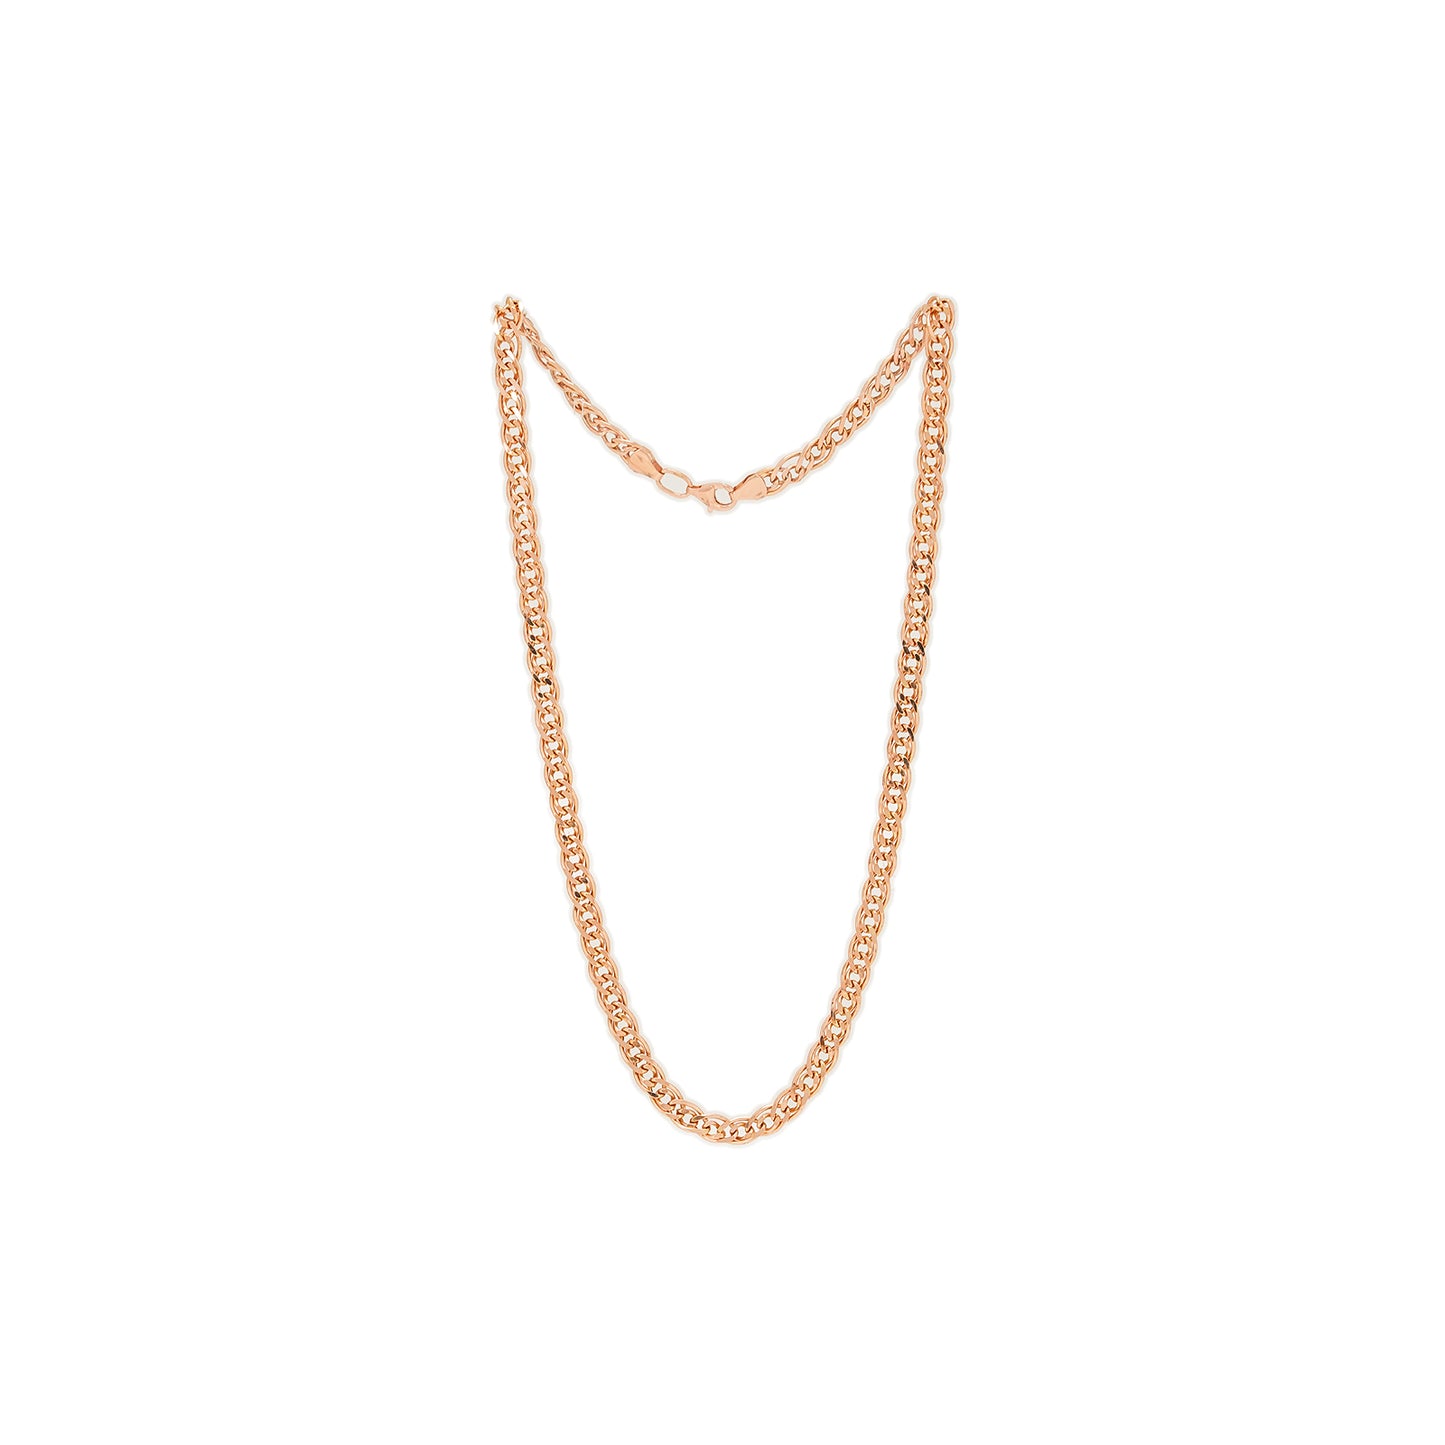 Rotgold kette 14K